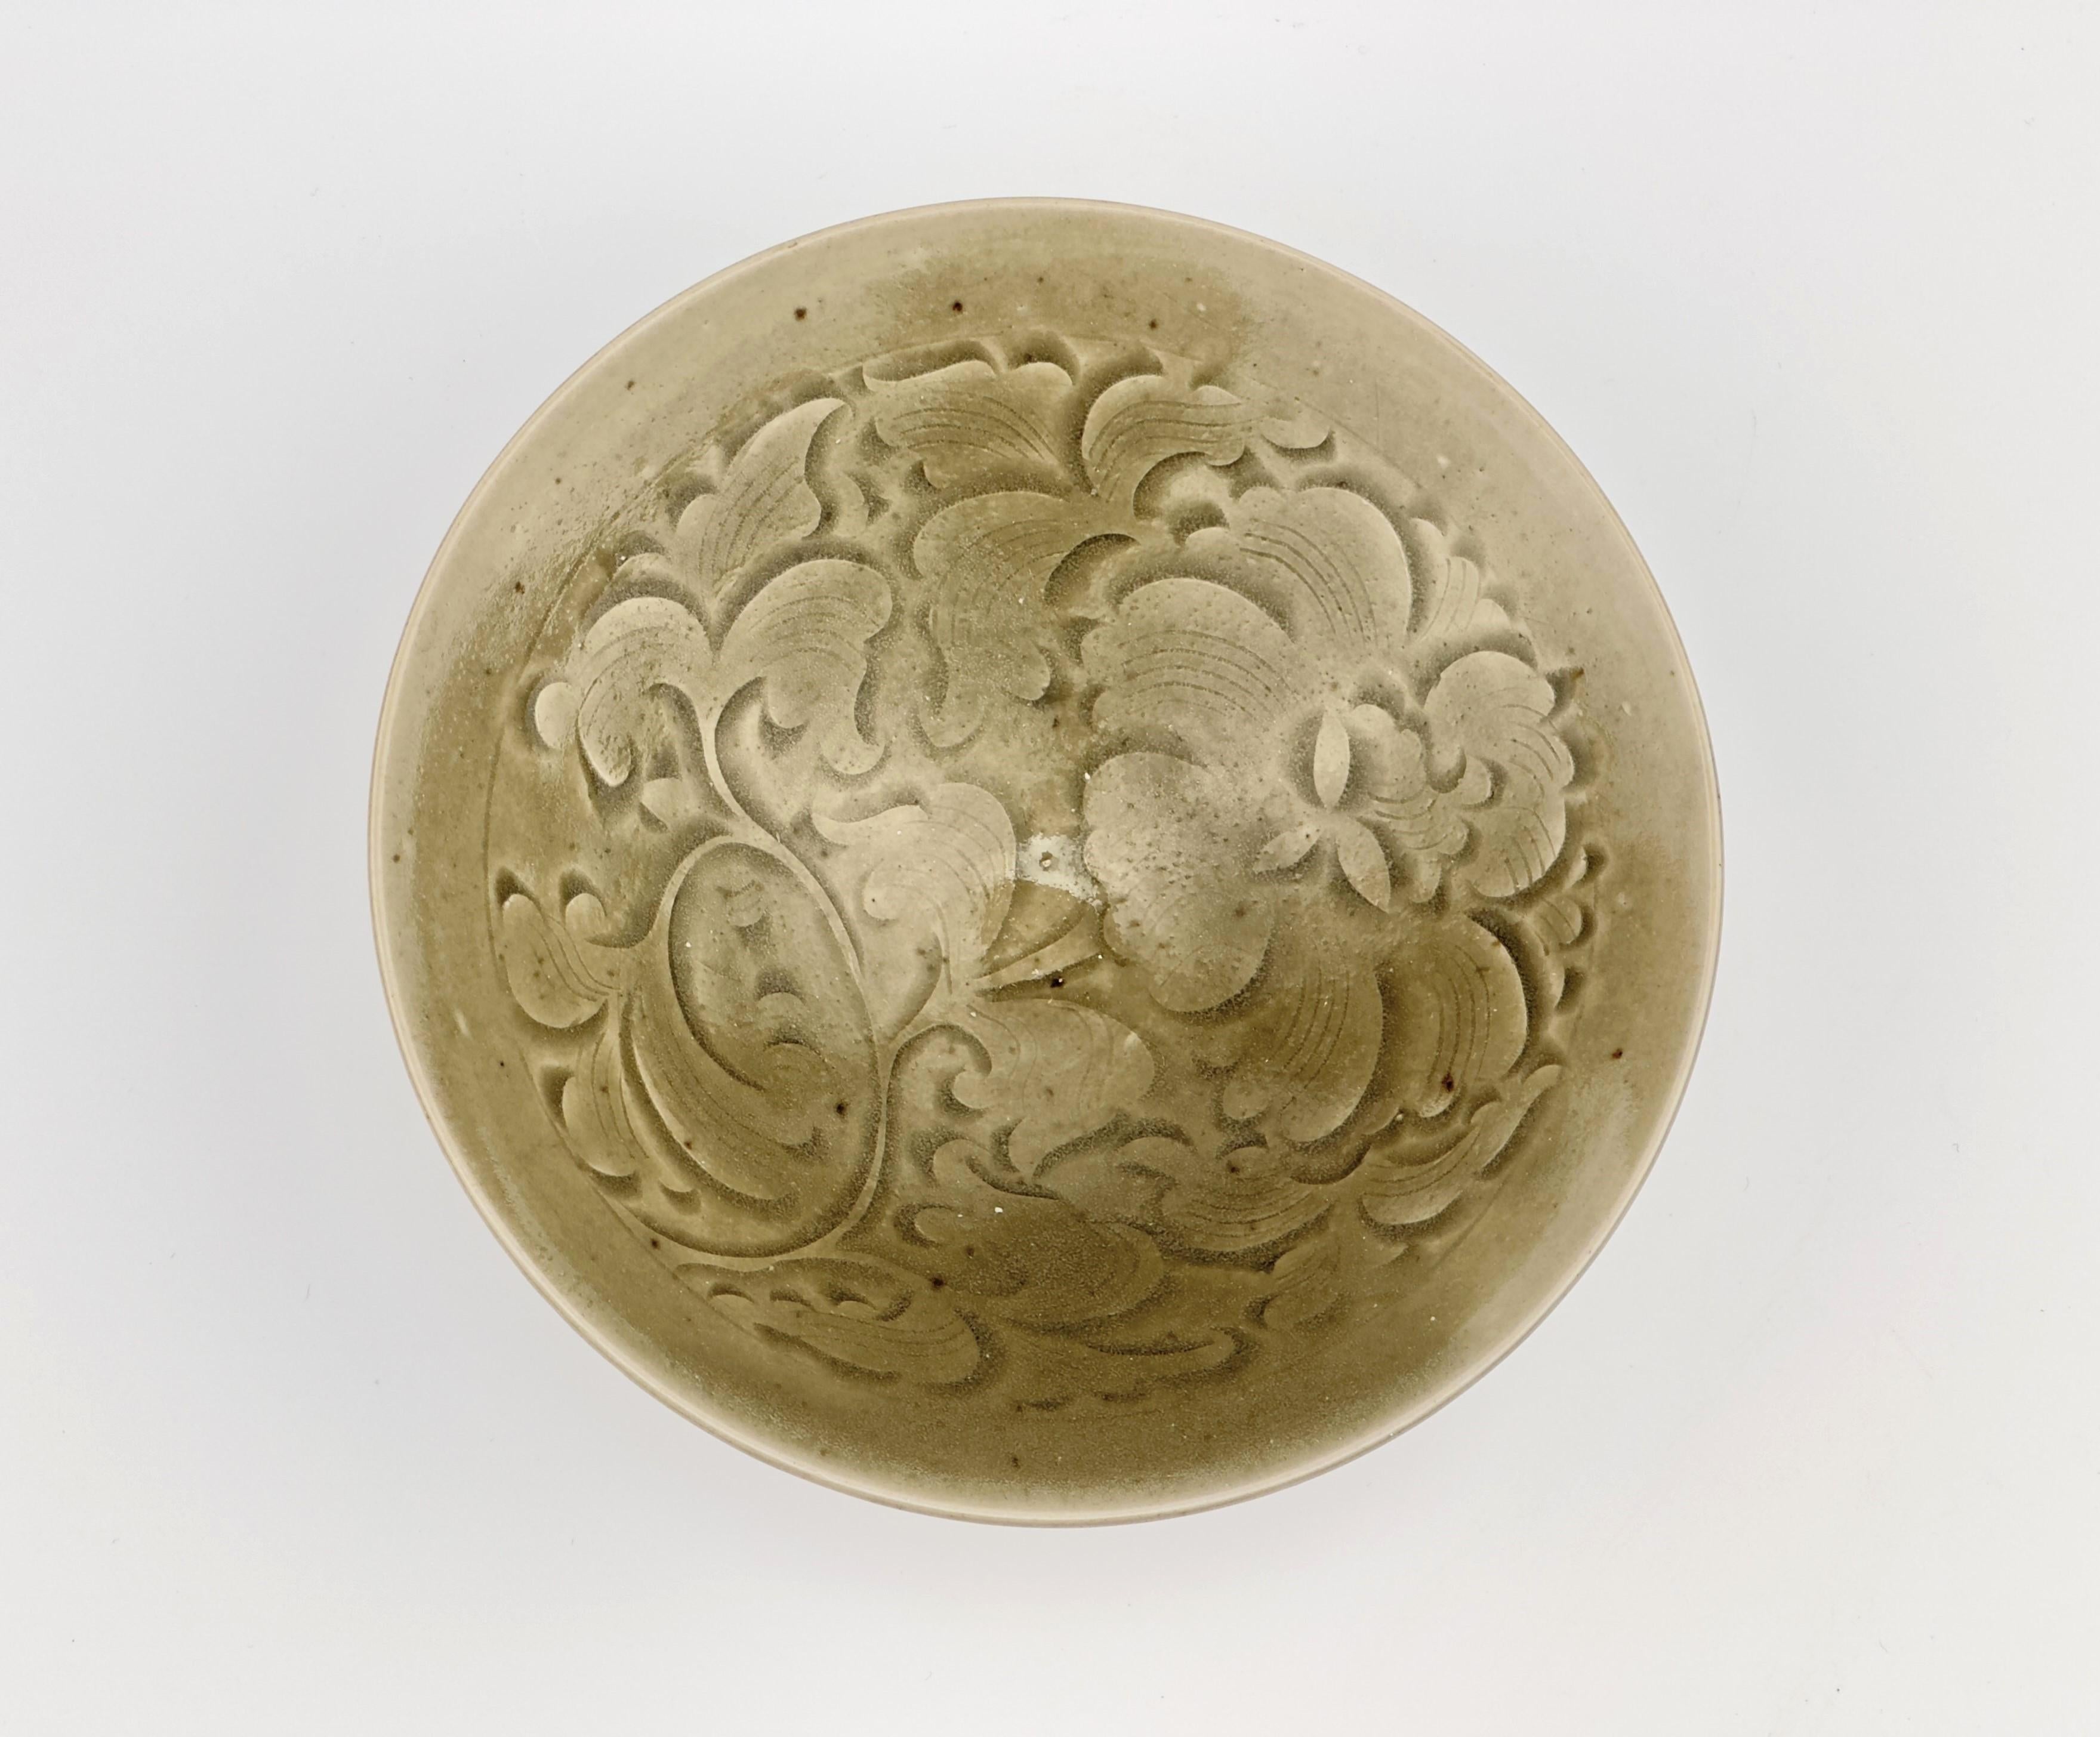 The bowl is potted with steep, flared sides and decorated to the interior with stylized peonies among scrolling tendrils. The exterior is carved with vertical lines below the everted mouth rim.

Period : Song Dynasty (AD 960~1279)
Type : Yaozhou